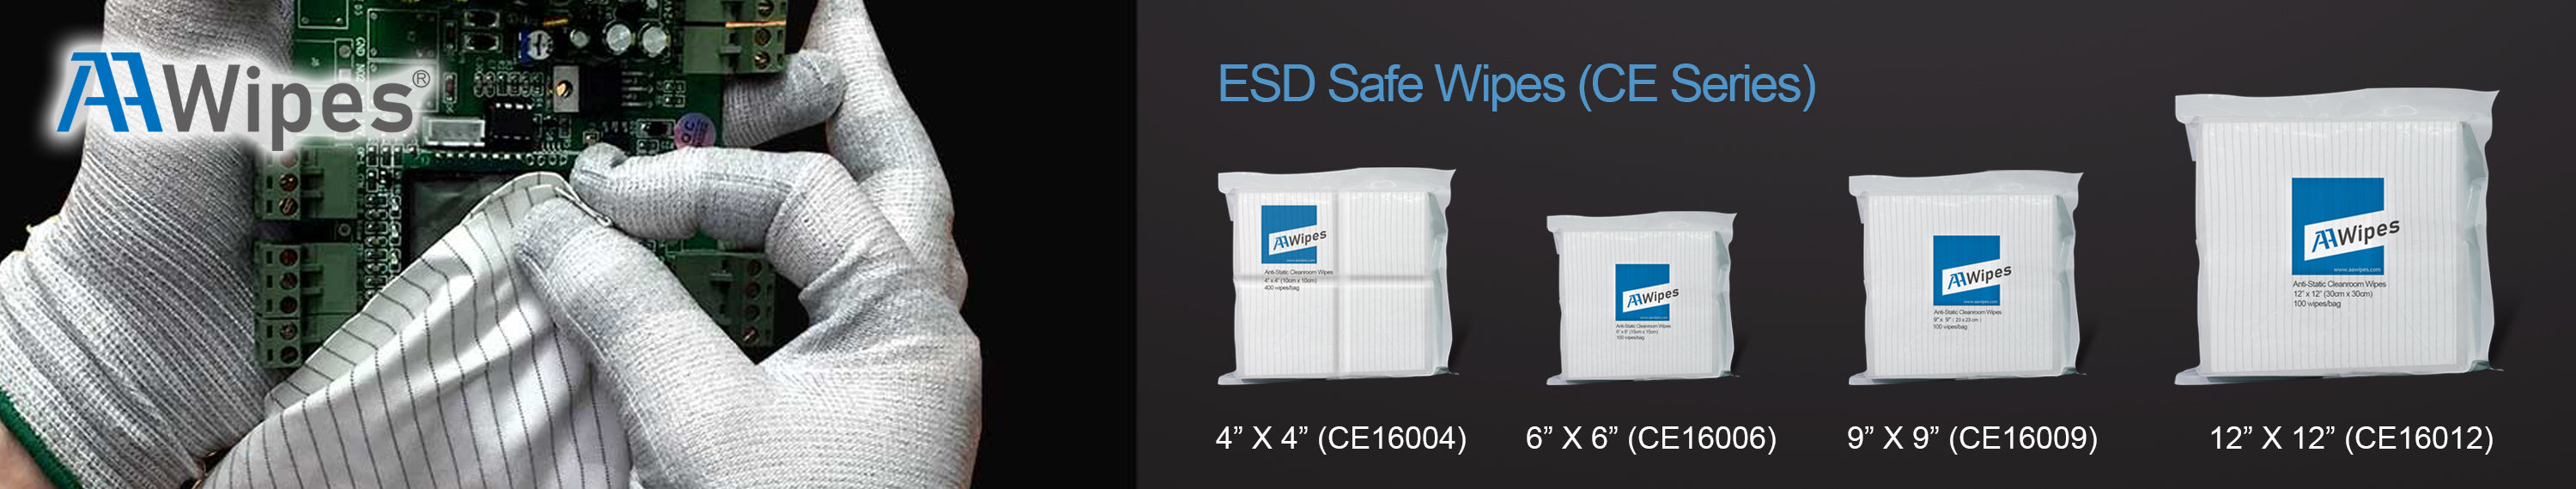 ESD Safe Wipes